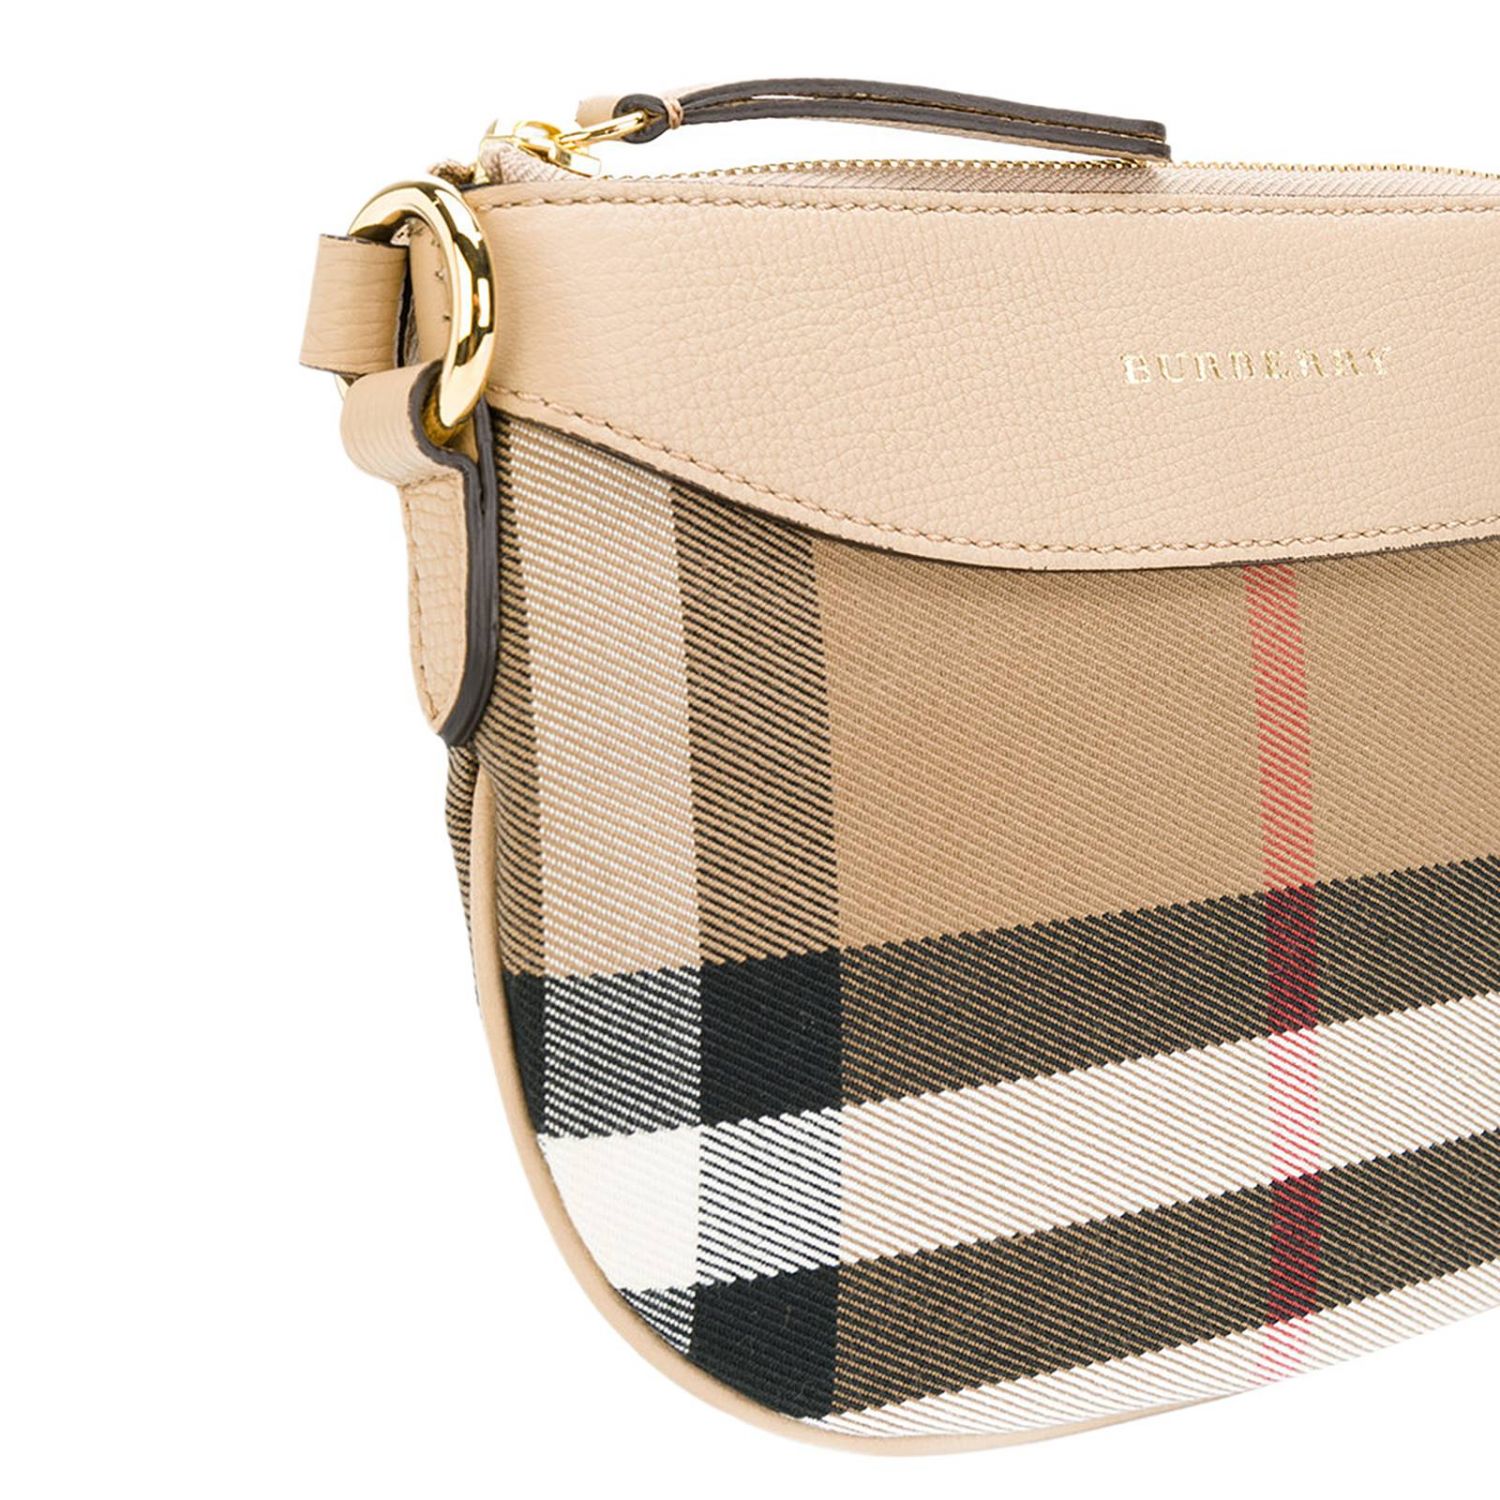 Burberry Layette Outlet: Bag kids - Multicolor | Bag Burberry Layette ...